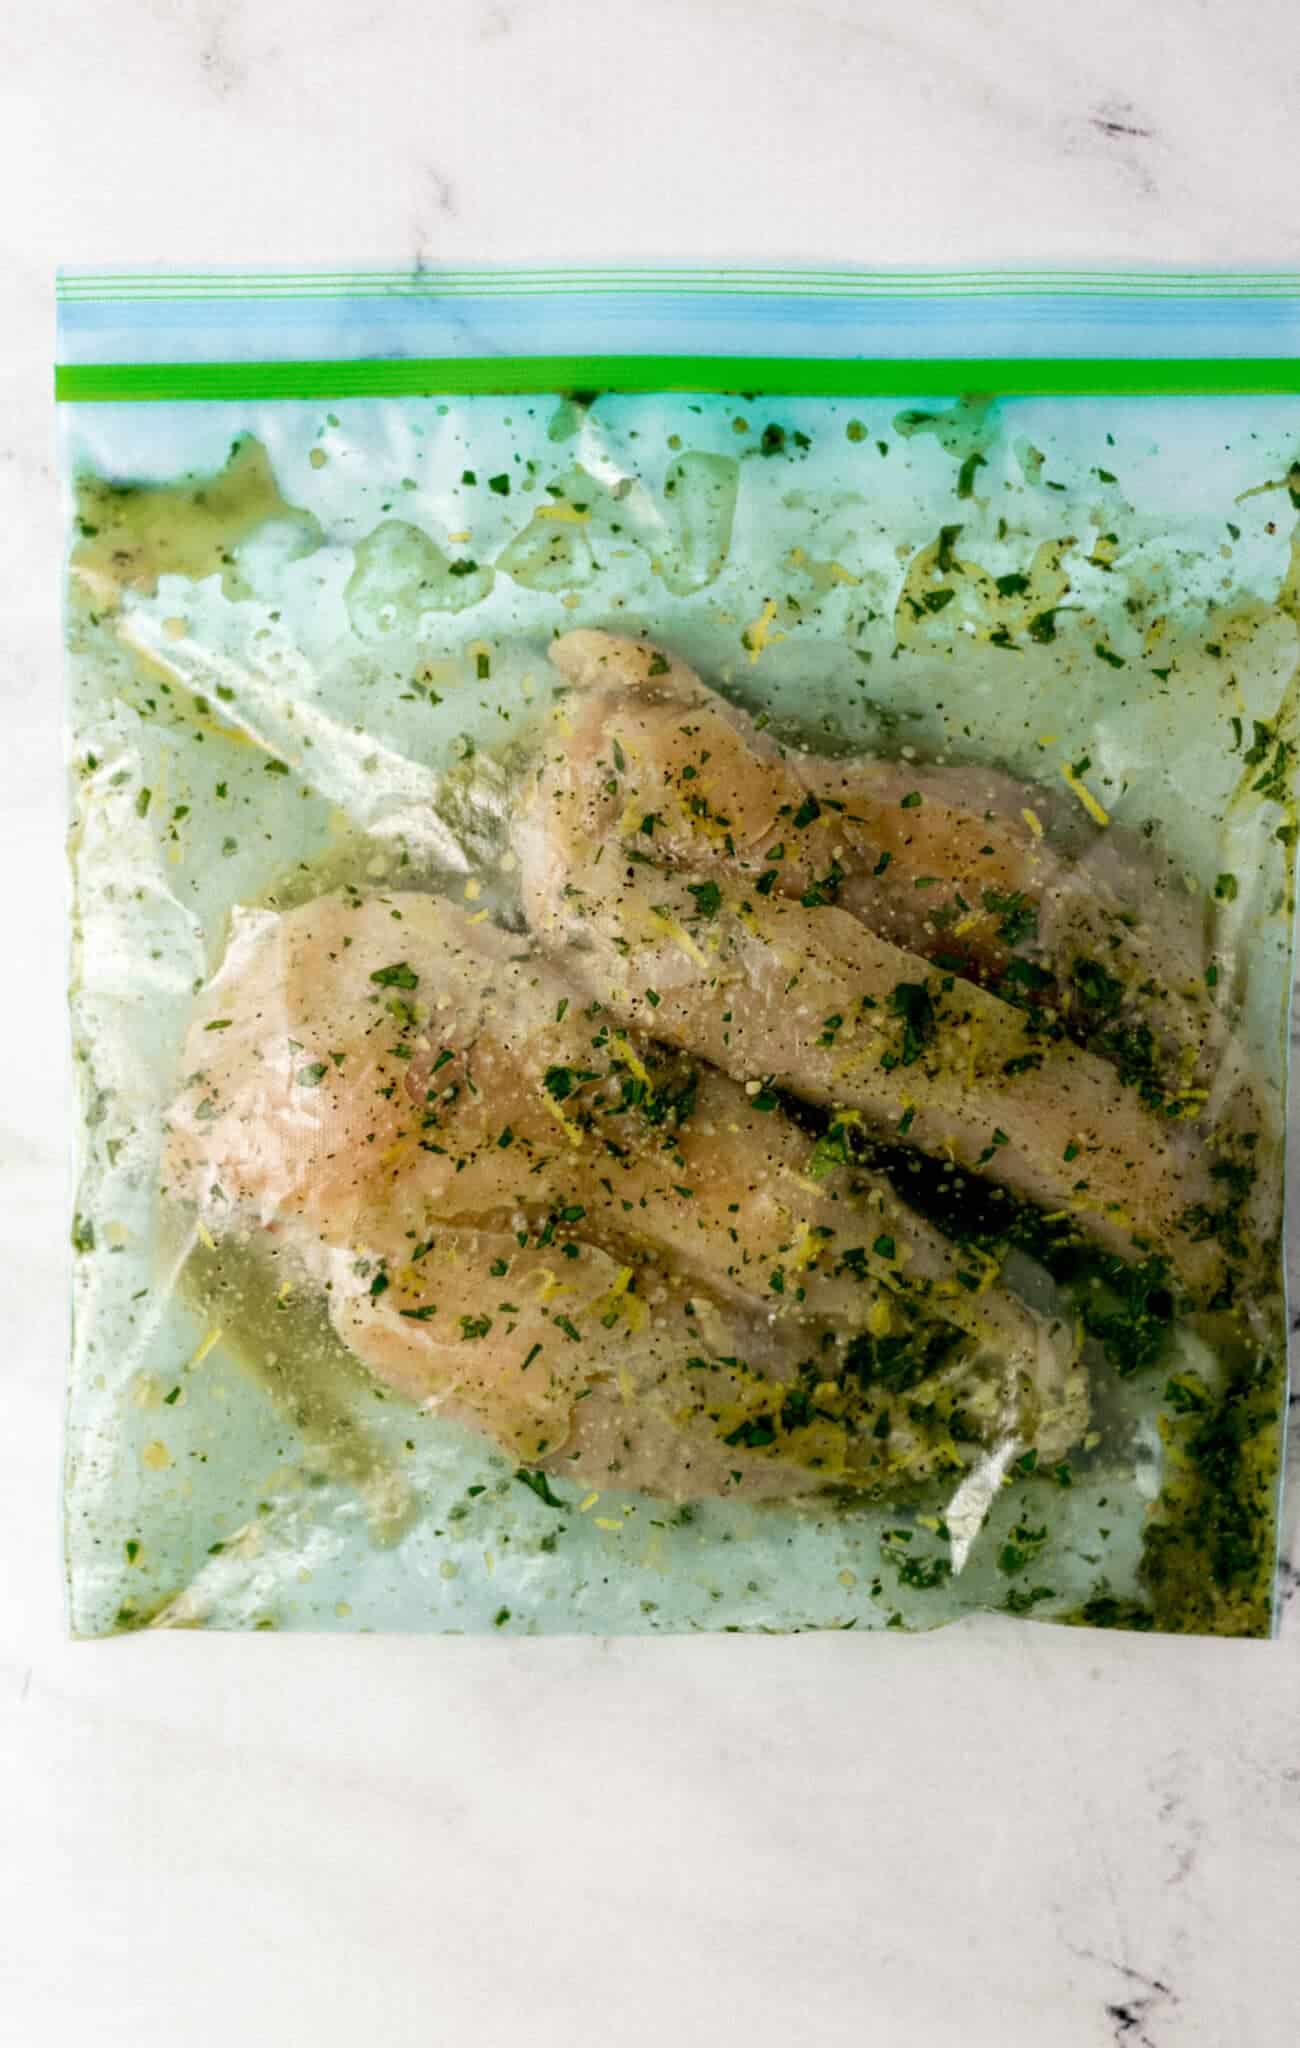 raw chicken and marinade inside a plastic bag 